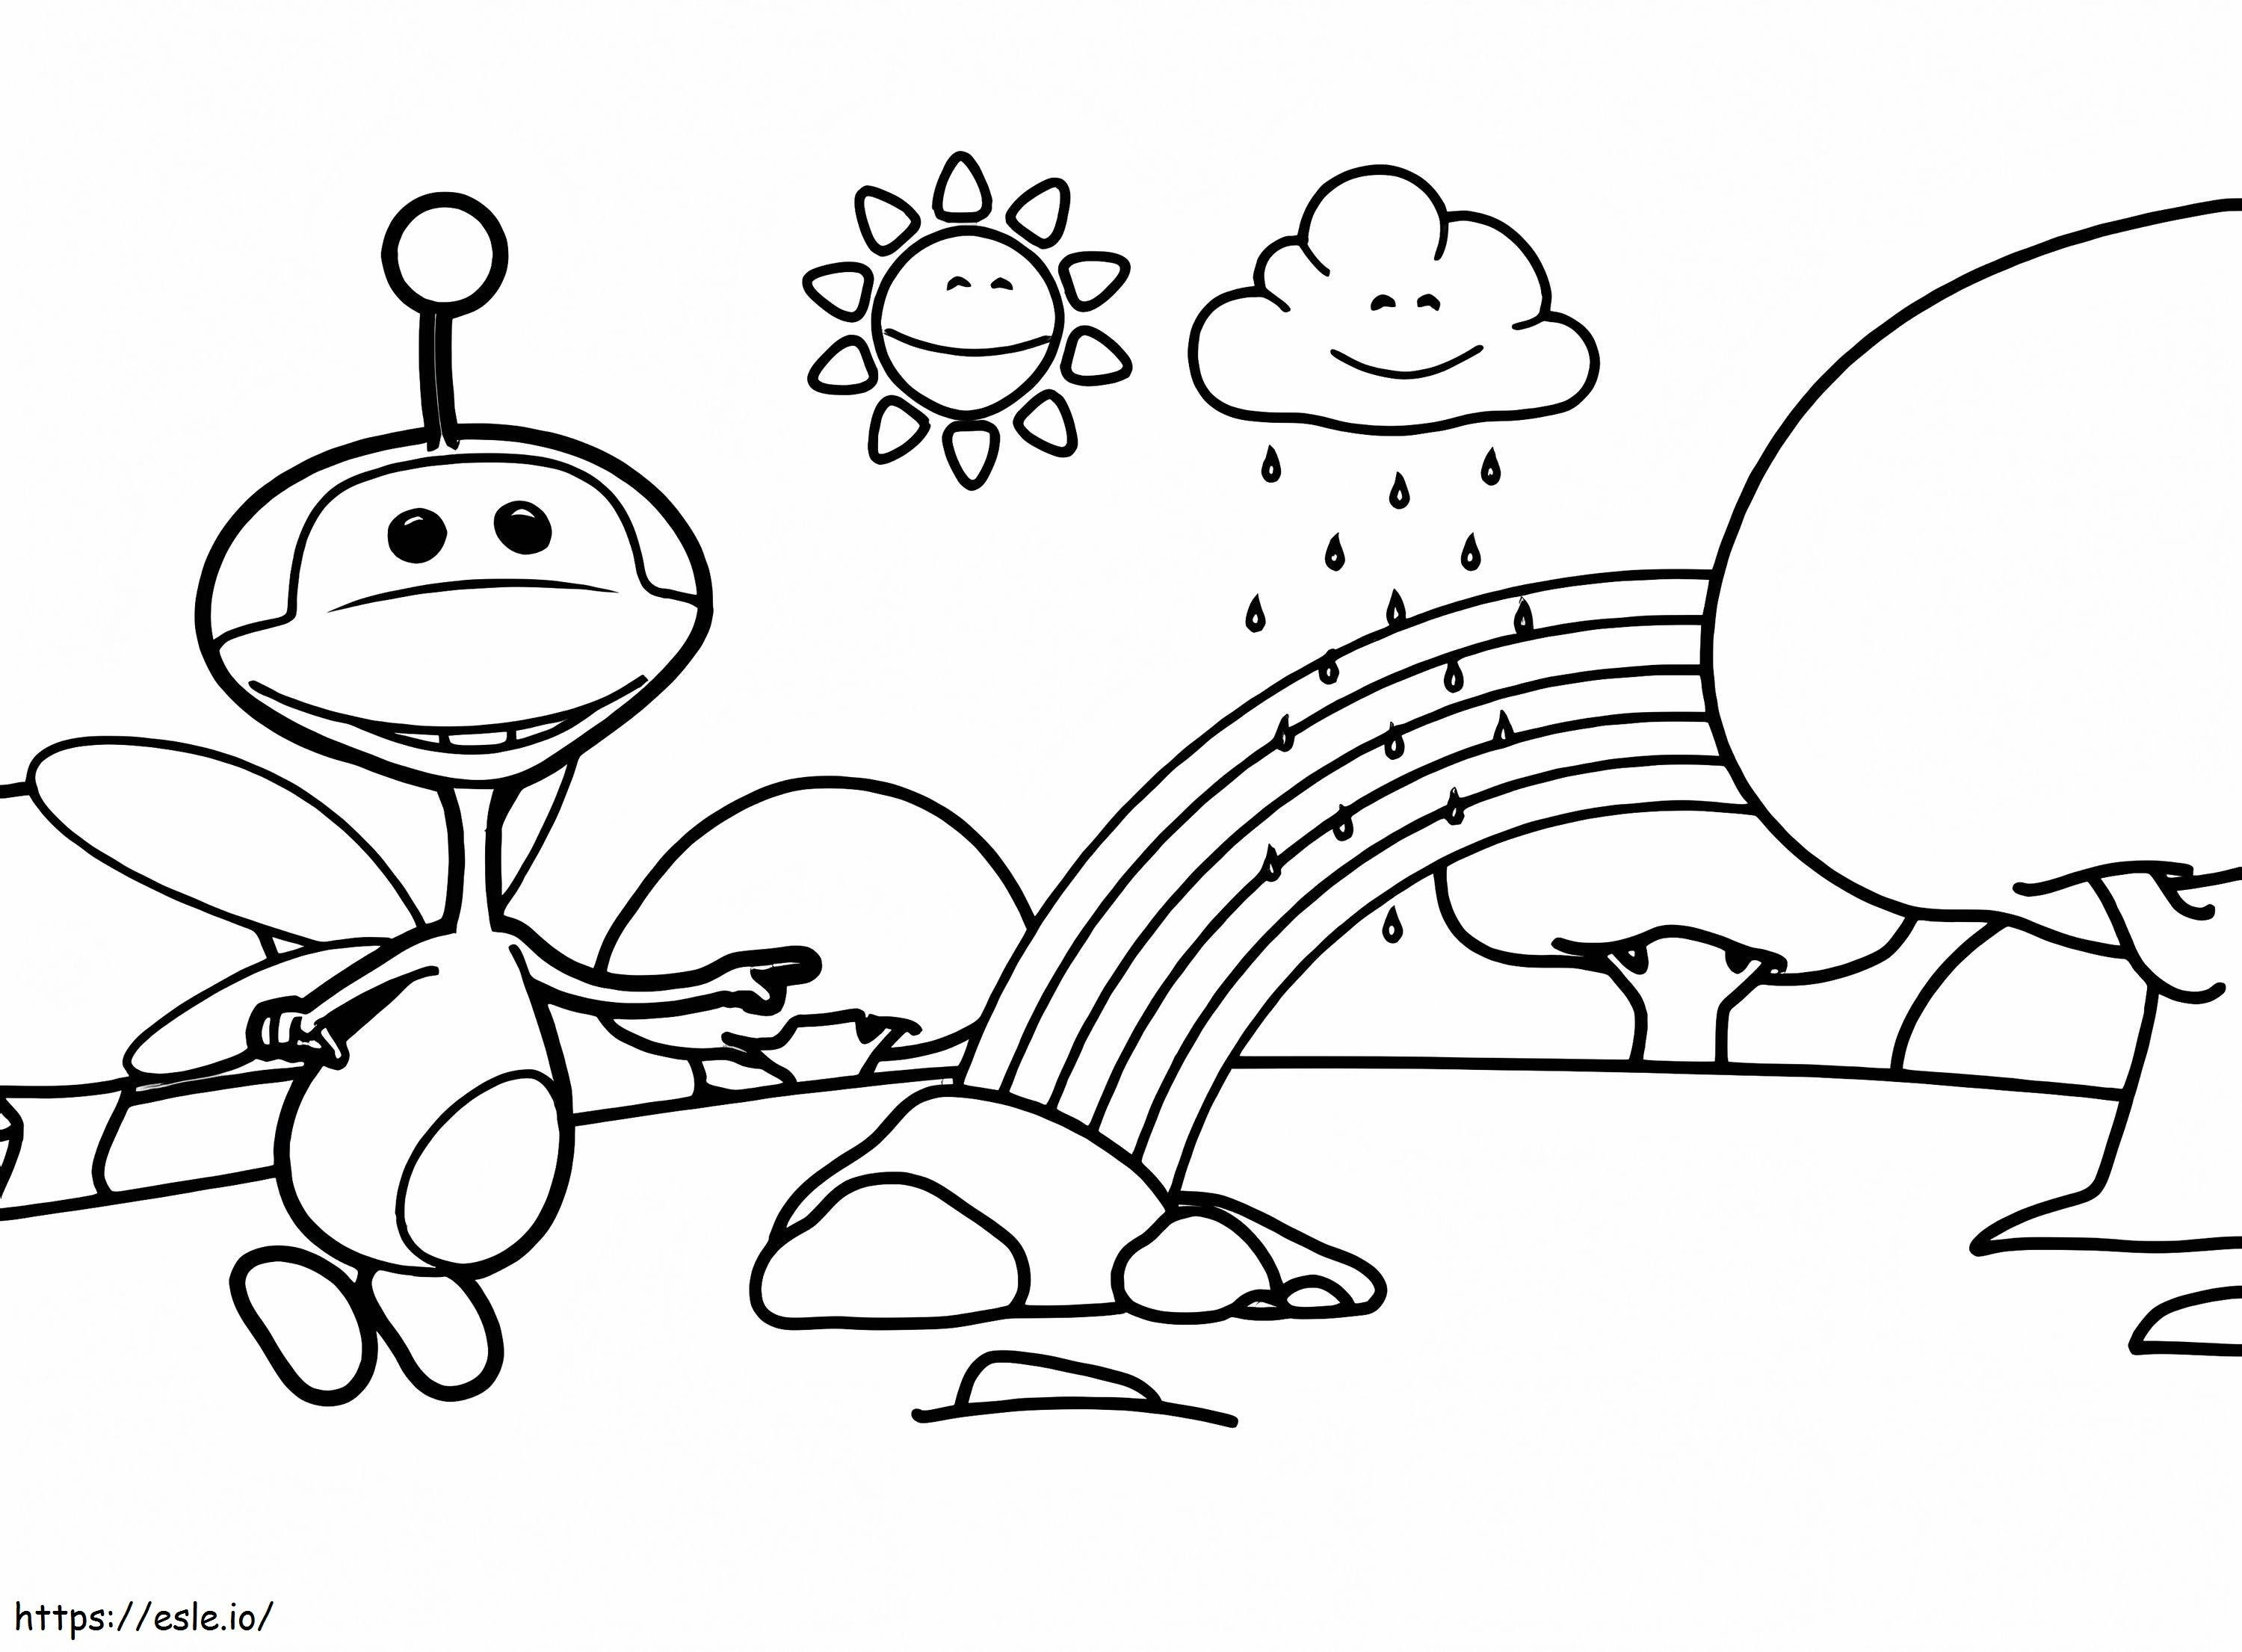 Uki With Sun And Cloud coloring page